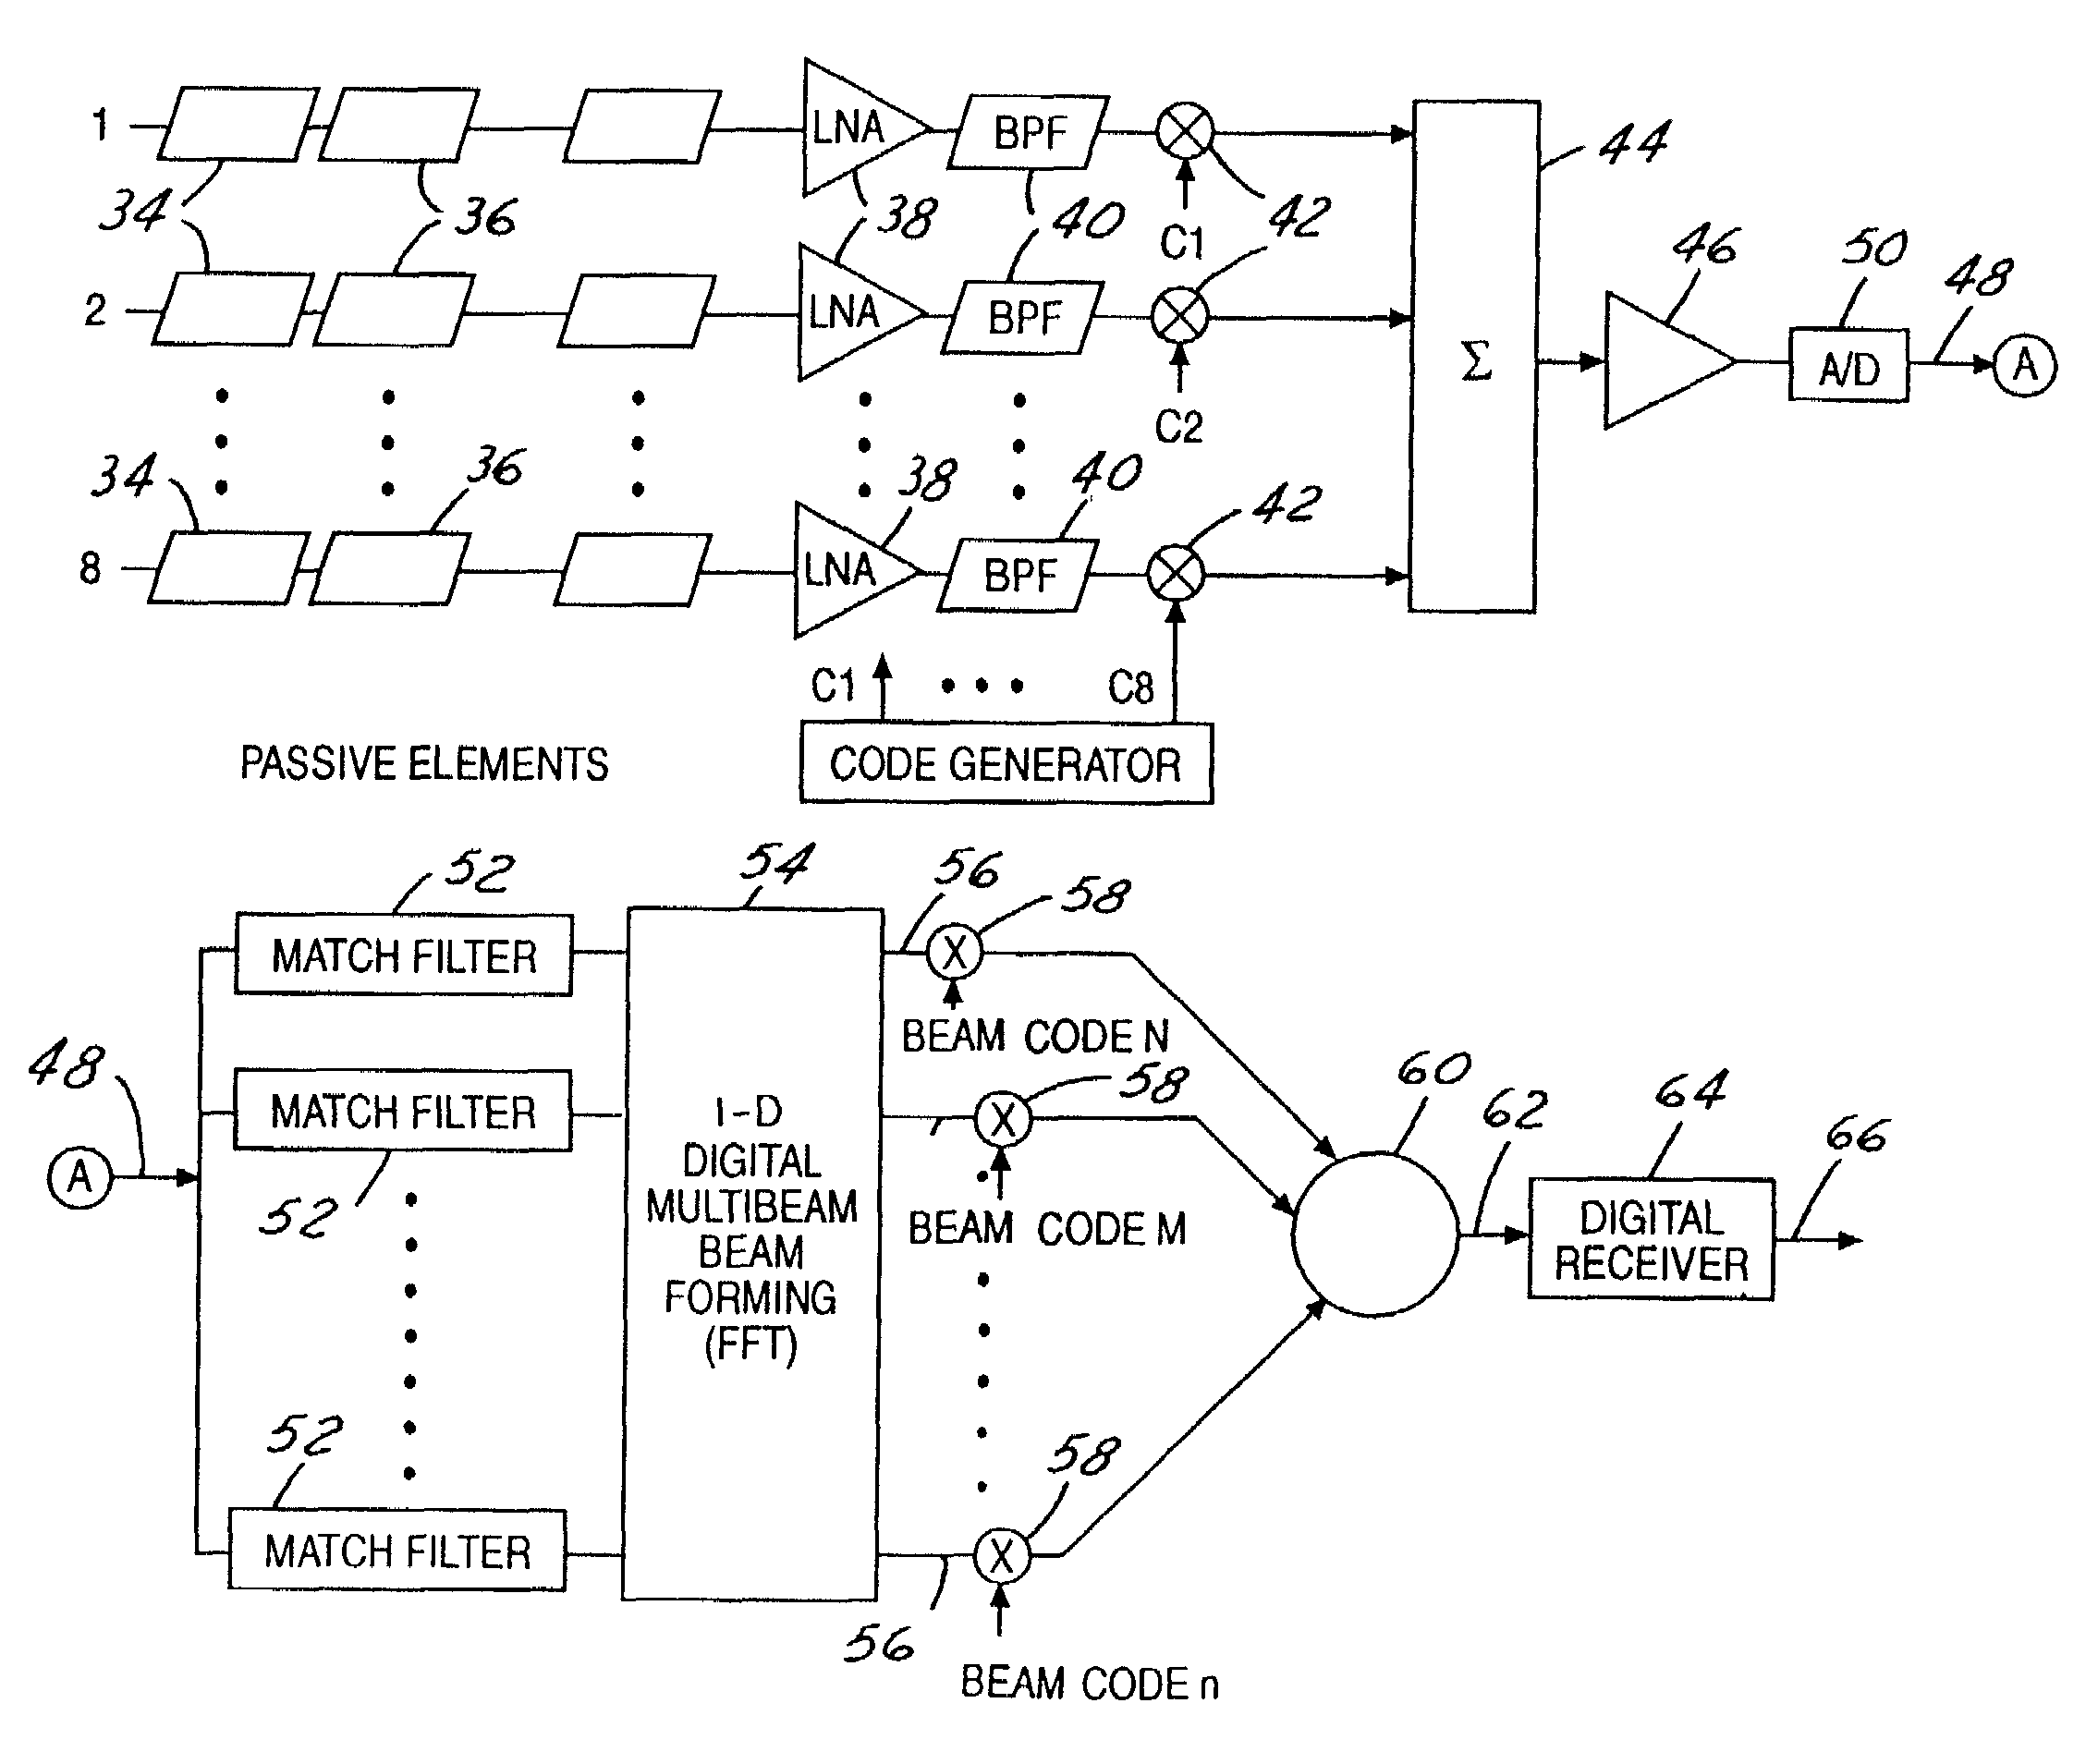 Phased array terminal for equatorial satellite constellations